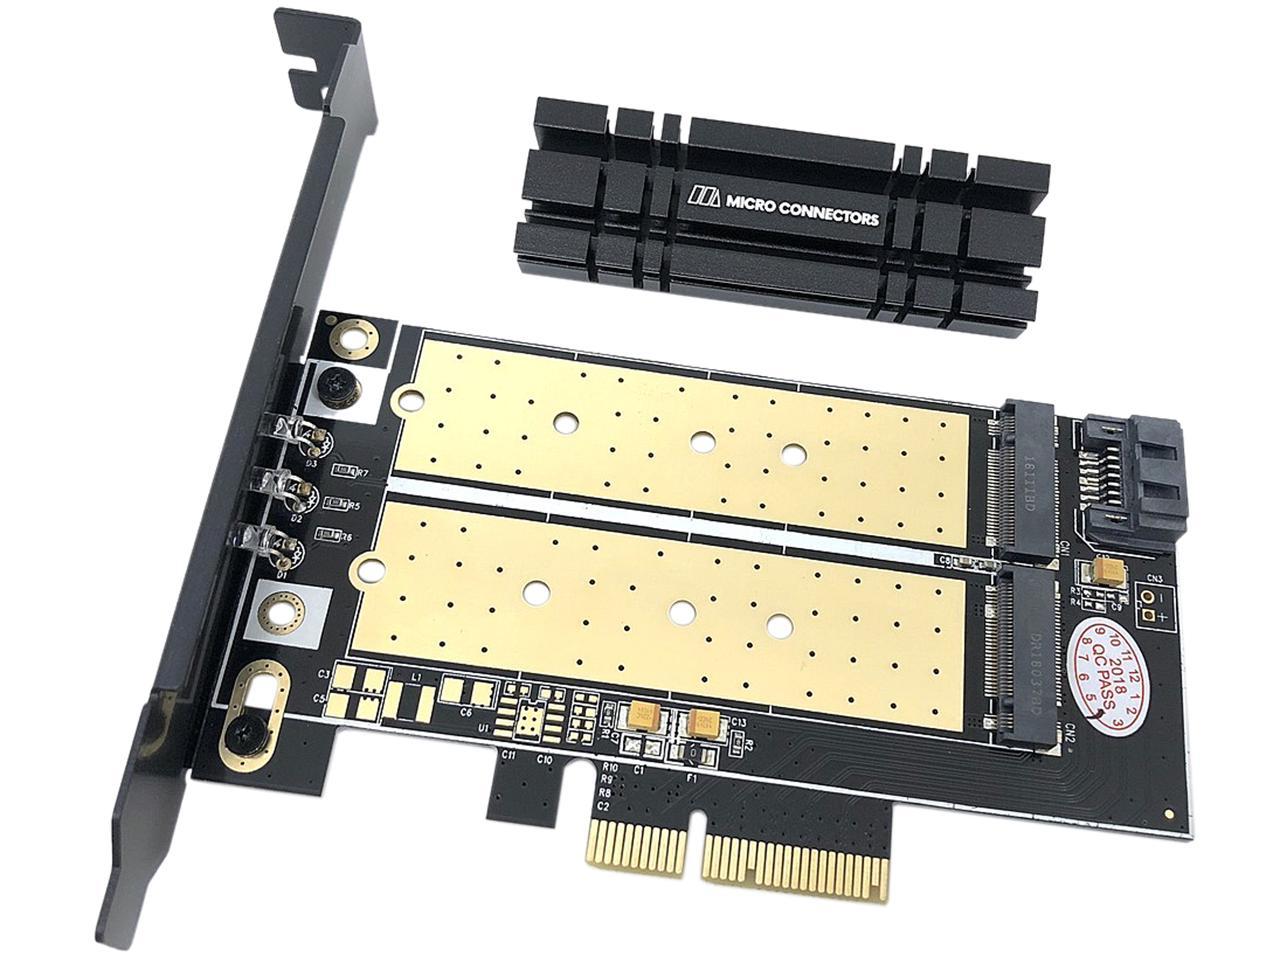 Micro Connectors M2 Nvme M2 Sata 80mm Ssd Pcie X4 Adapter With Heat Sink Model Pcie M20802hs 6094